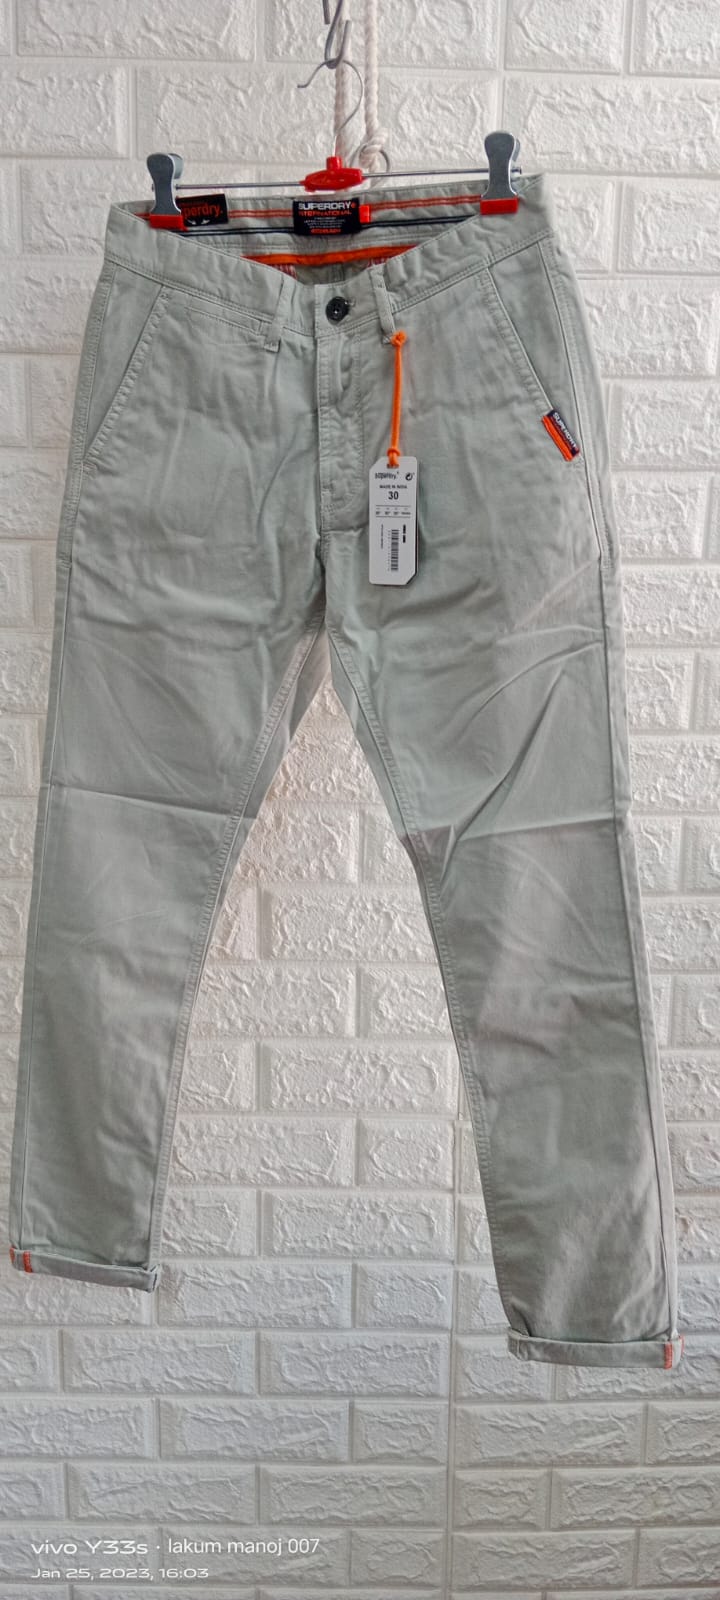 Details View - Super dry cotton chinos photos - reseller bazzar